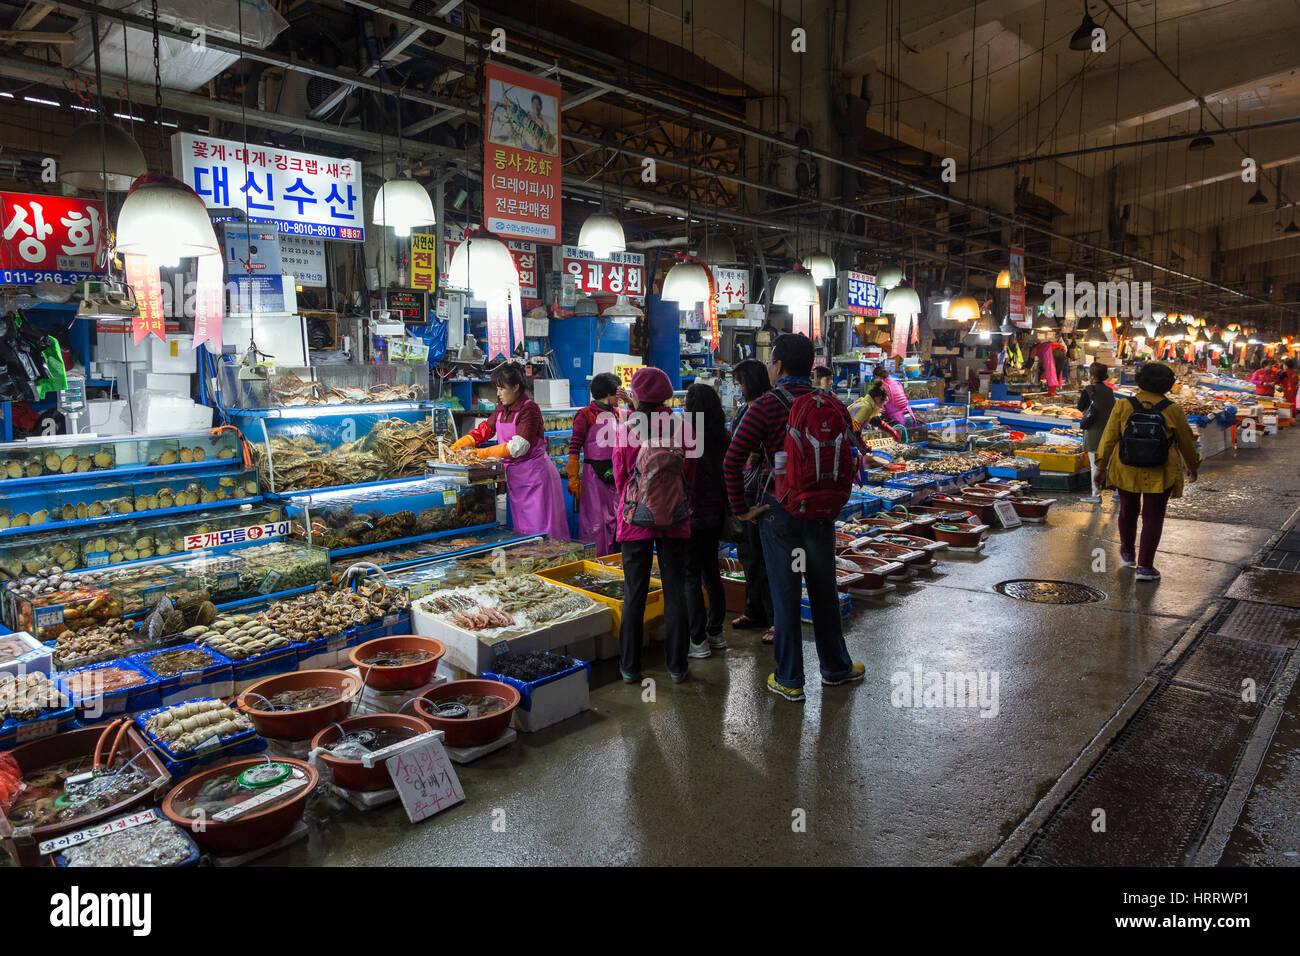 All kind of seafood in water tanks and containers and people in front of them at the Noryangjin Fish Market in Seoul, South Korea. Stock Photo